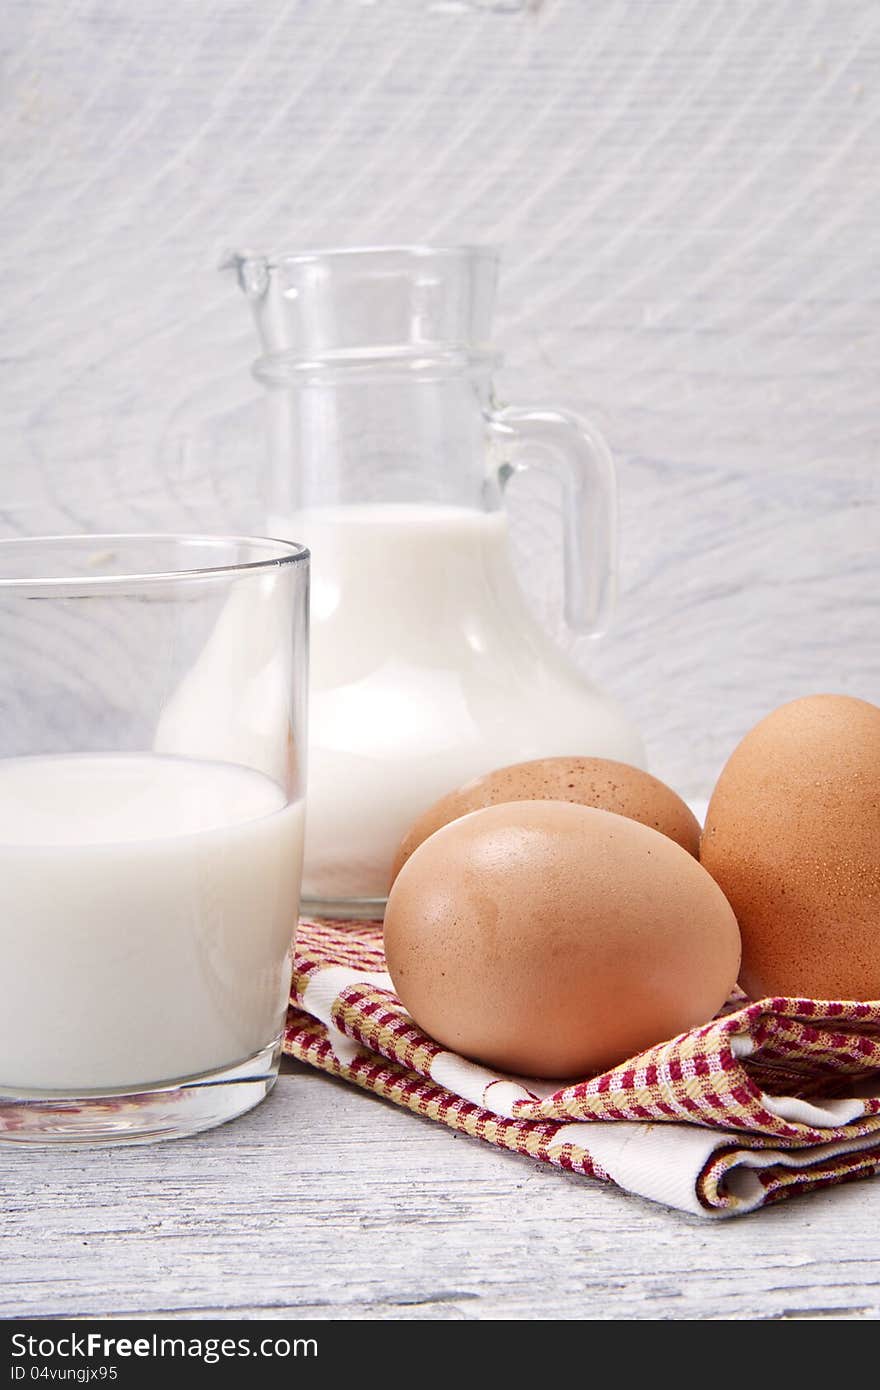 Staple foods in the kitchen, milk and eggs. Staple foods in the kitchen, milk and eggs